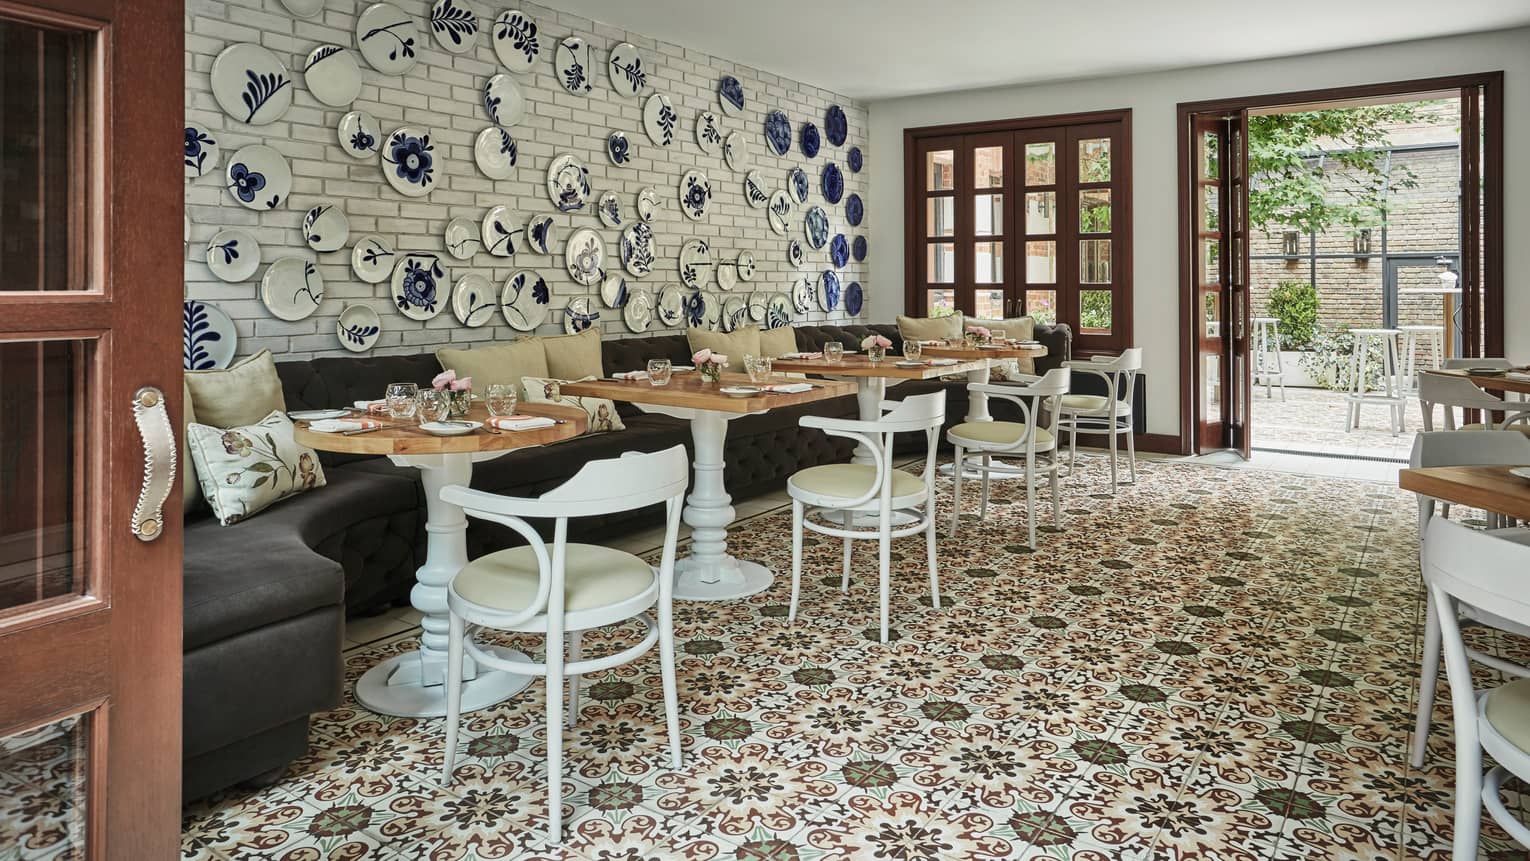 Blue-and-white decorative plates on wall over velvet banquette, cafe tables and chairs, tile floor